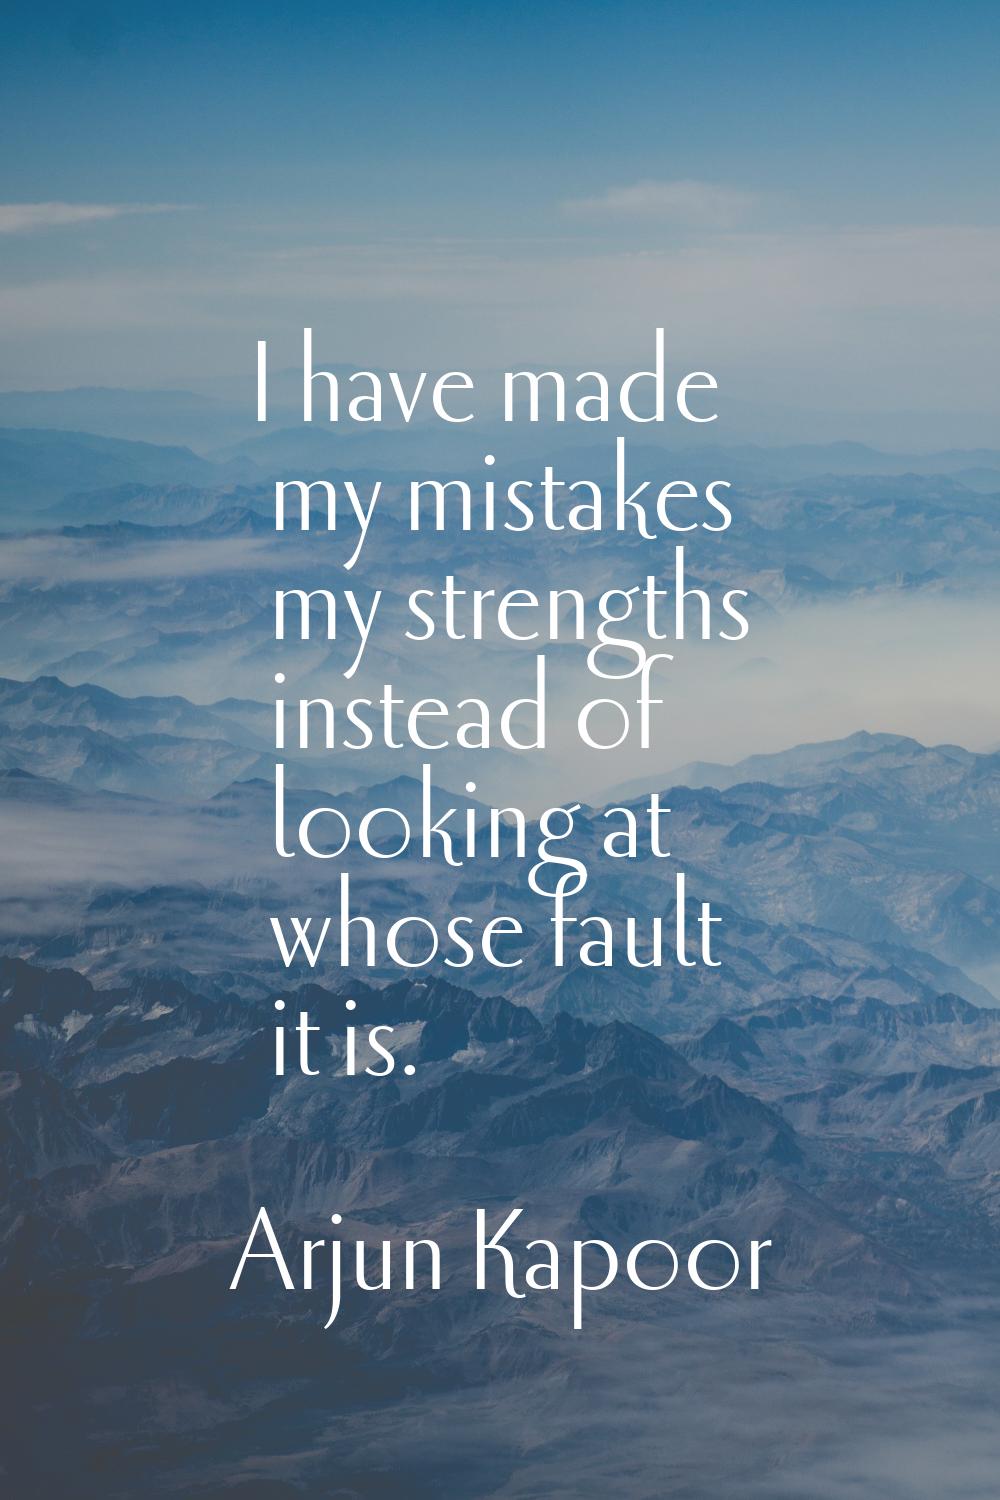 I have made my mistakes my strengths instead of looking at whose fault it is.